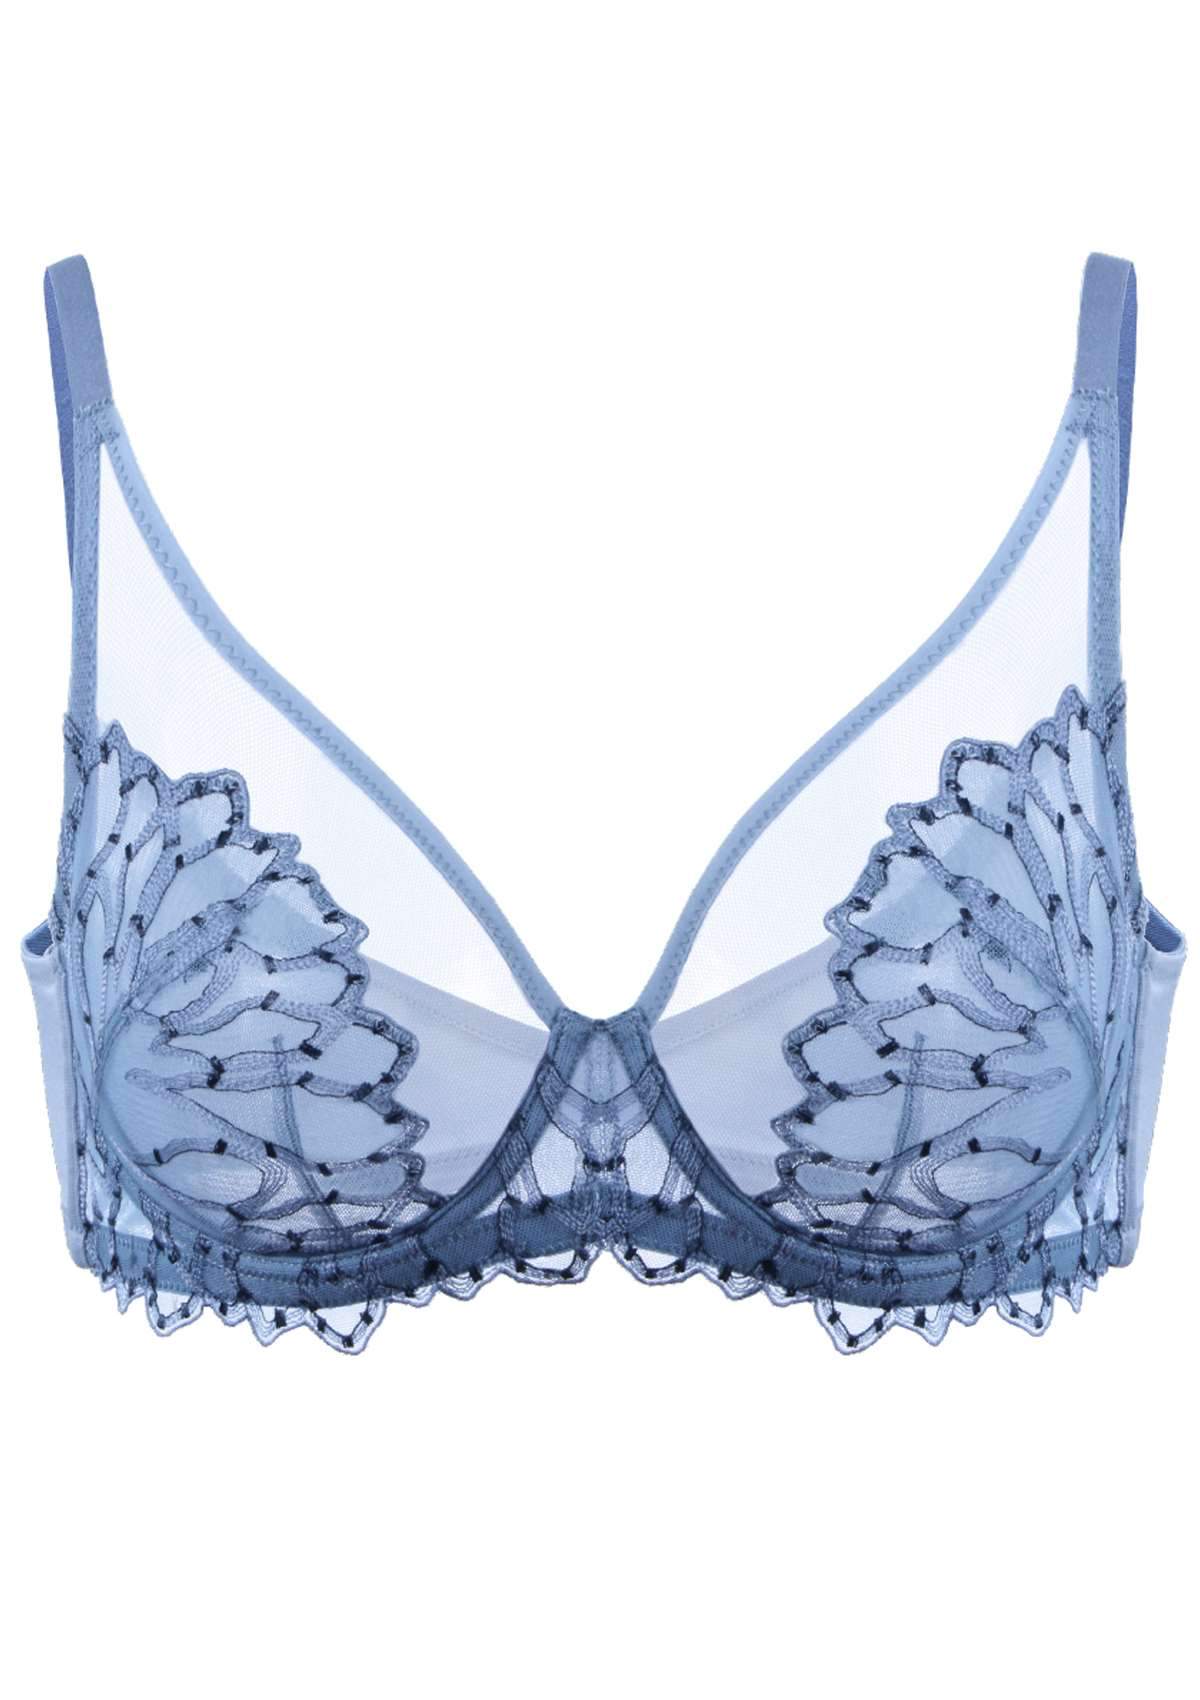 HSIA Chrysanthemum Plus Size Lace Bra: Back Support Bra For Posture - Light Pink / 34 / DDD/F